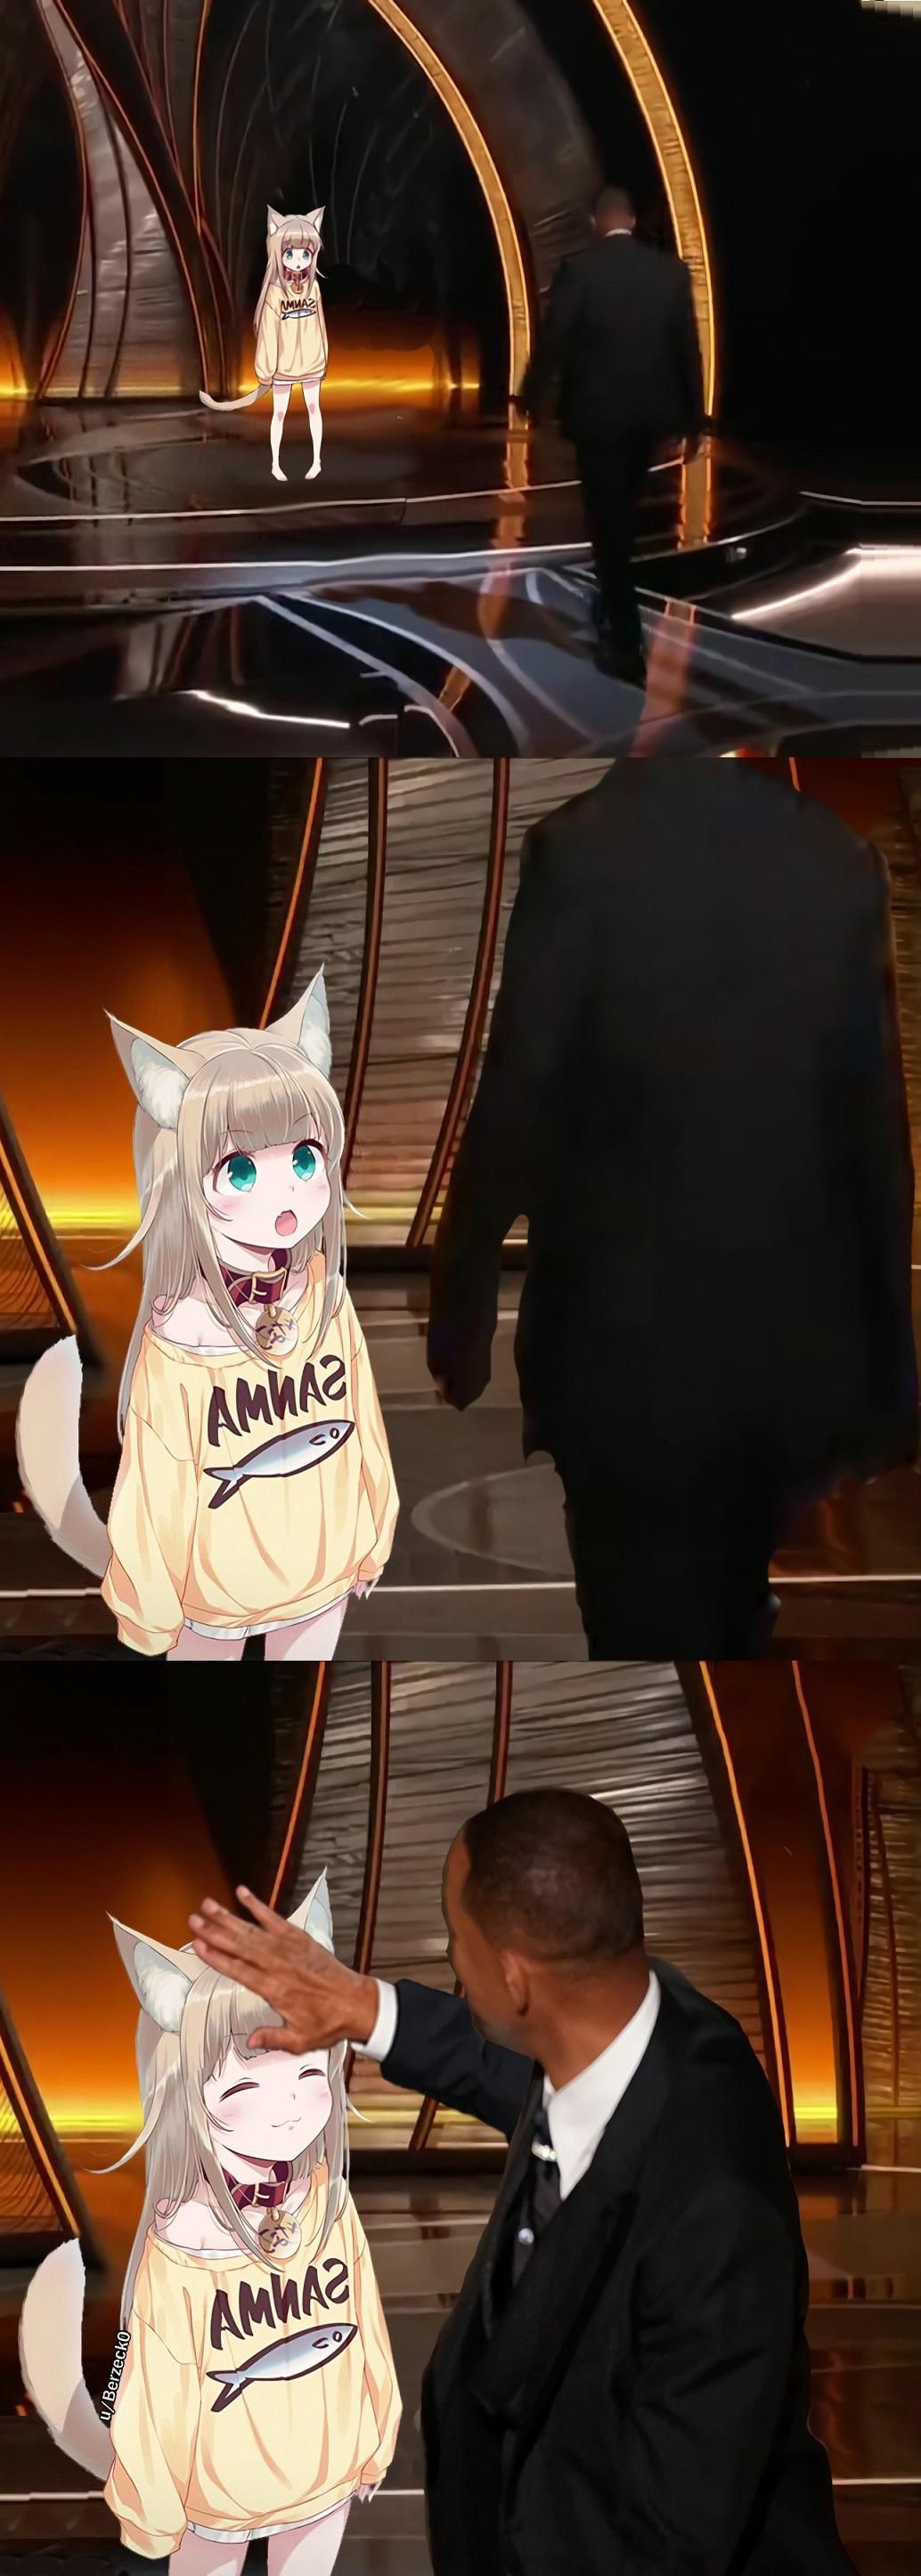 Will you pat the catgirl?